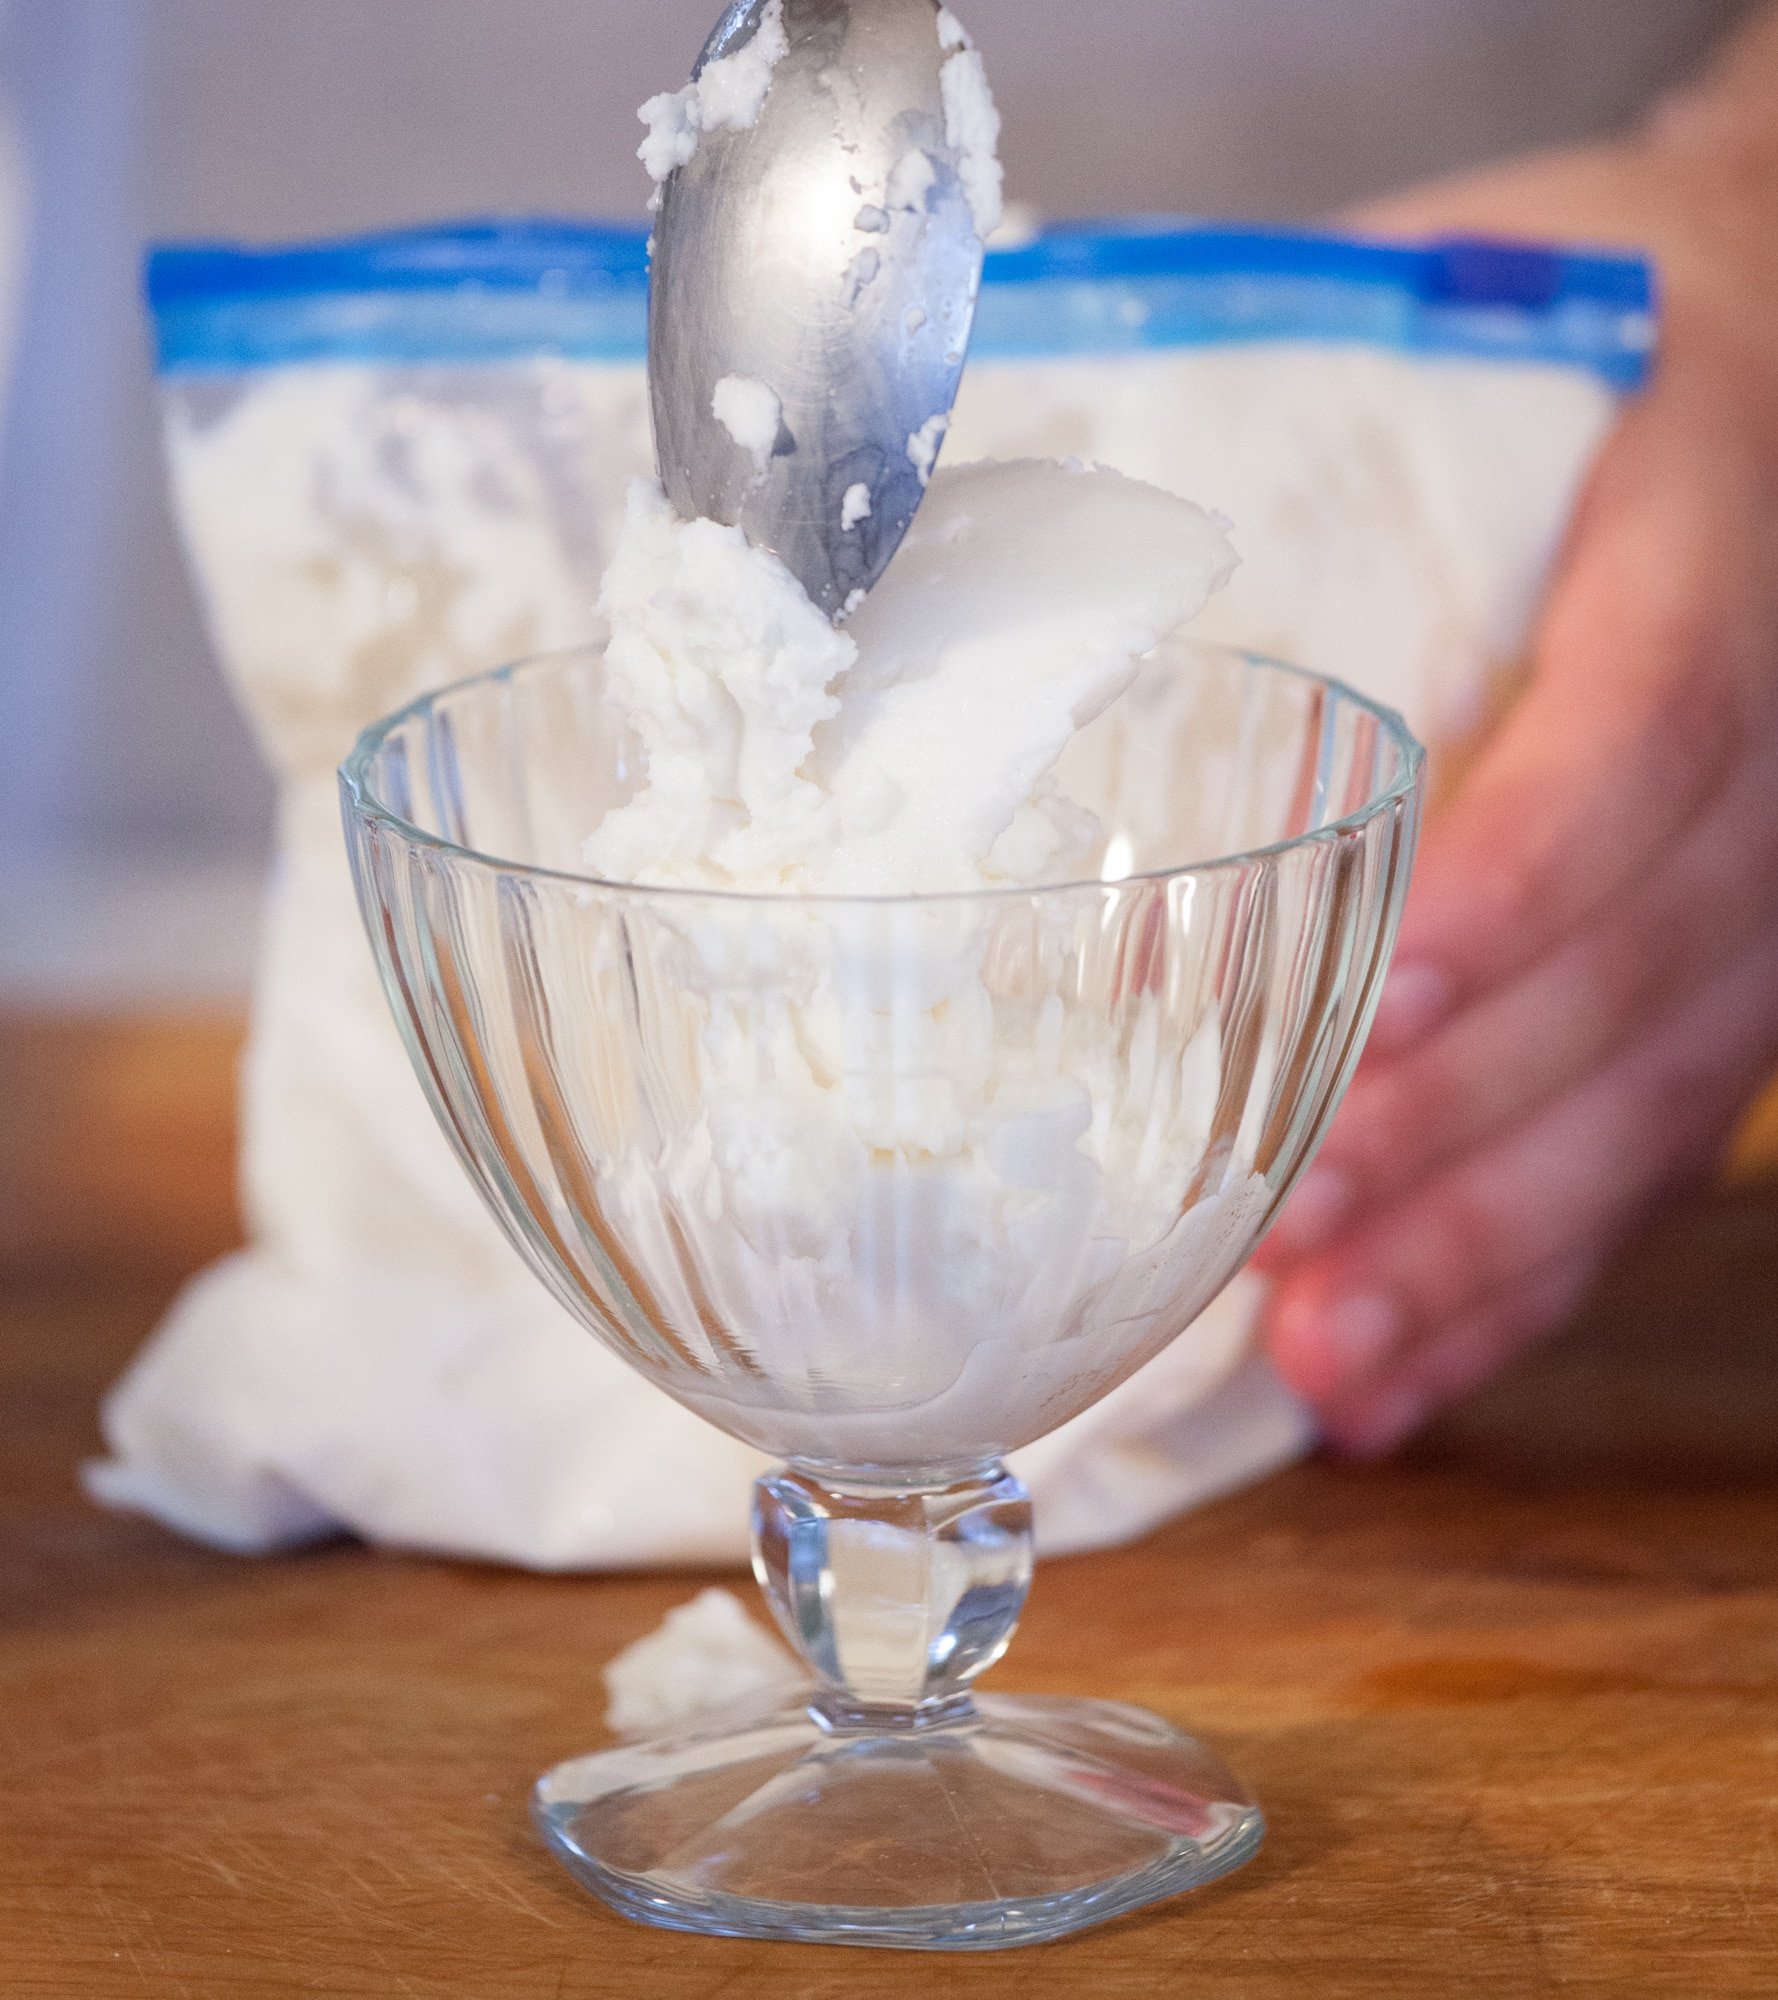 https://jerryjamesstone.com/wp-content/uploads/2015/07/Homemade-Ice-Cream-Without-a-Machine-in-Just-5-Minutes-Square.jpg